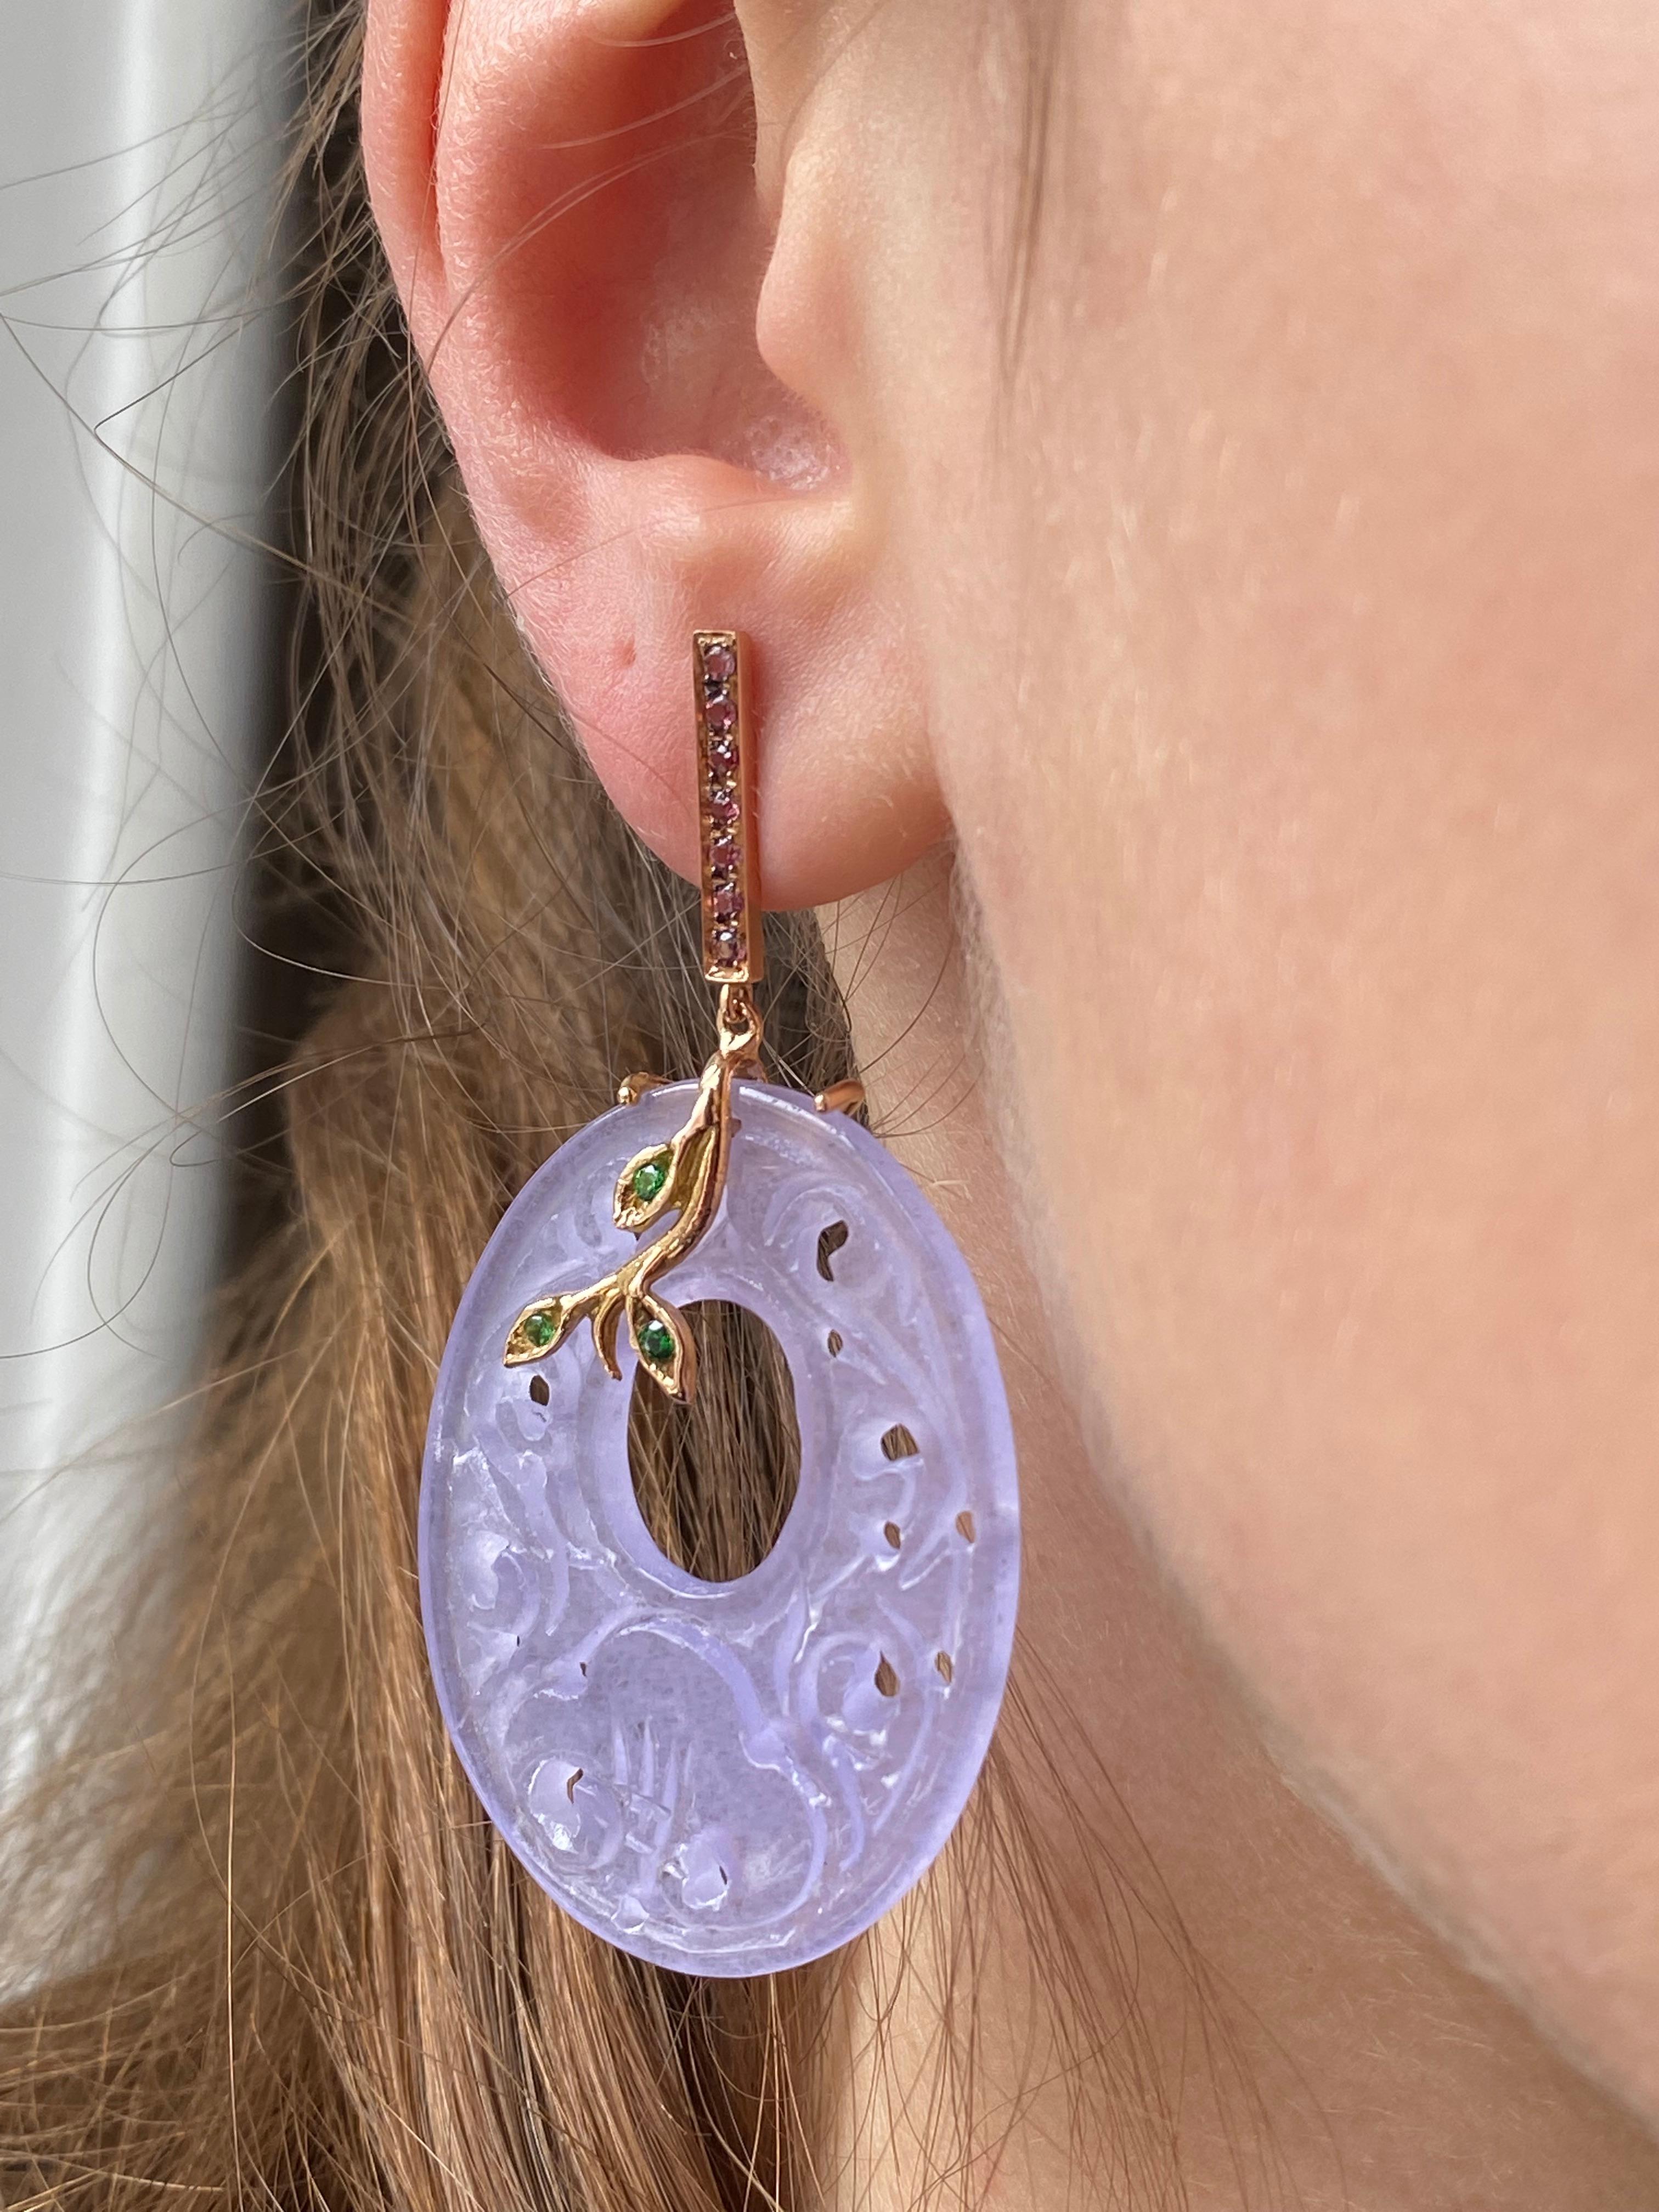 Rossella Ugolini Design Collection, Handcrafted Purple Jade color earrings, made of 18 karats yellow gold, soft splashes of color that pay homage to the typical palettes of the Deco more genuine taste, for a sophisticated femininity, suitable for